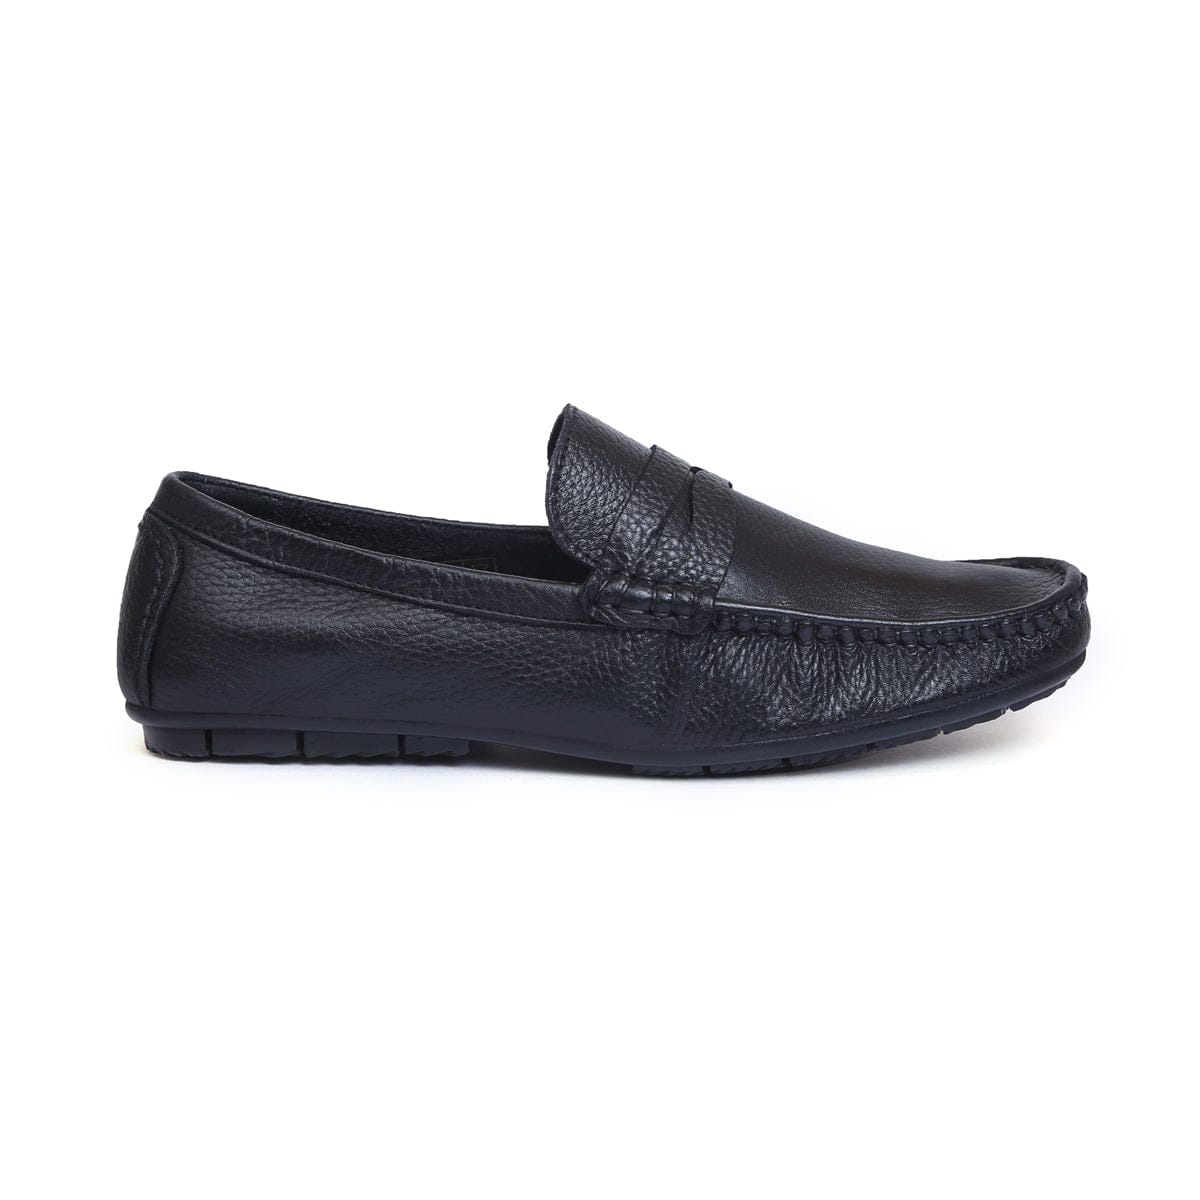 Men’s Genuine Leather Loafers BT - 36_1